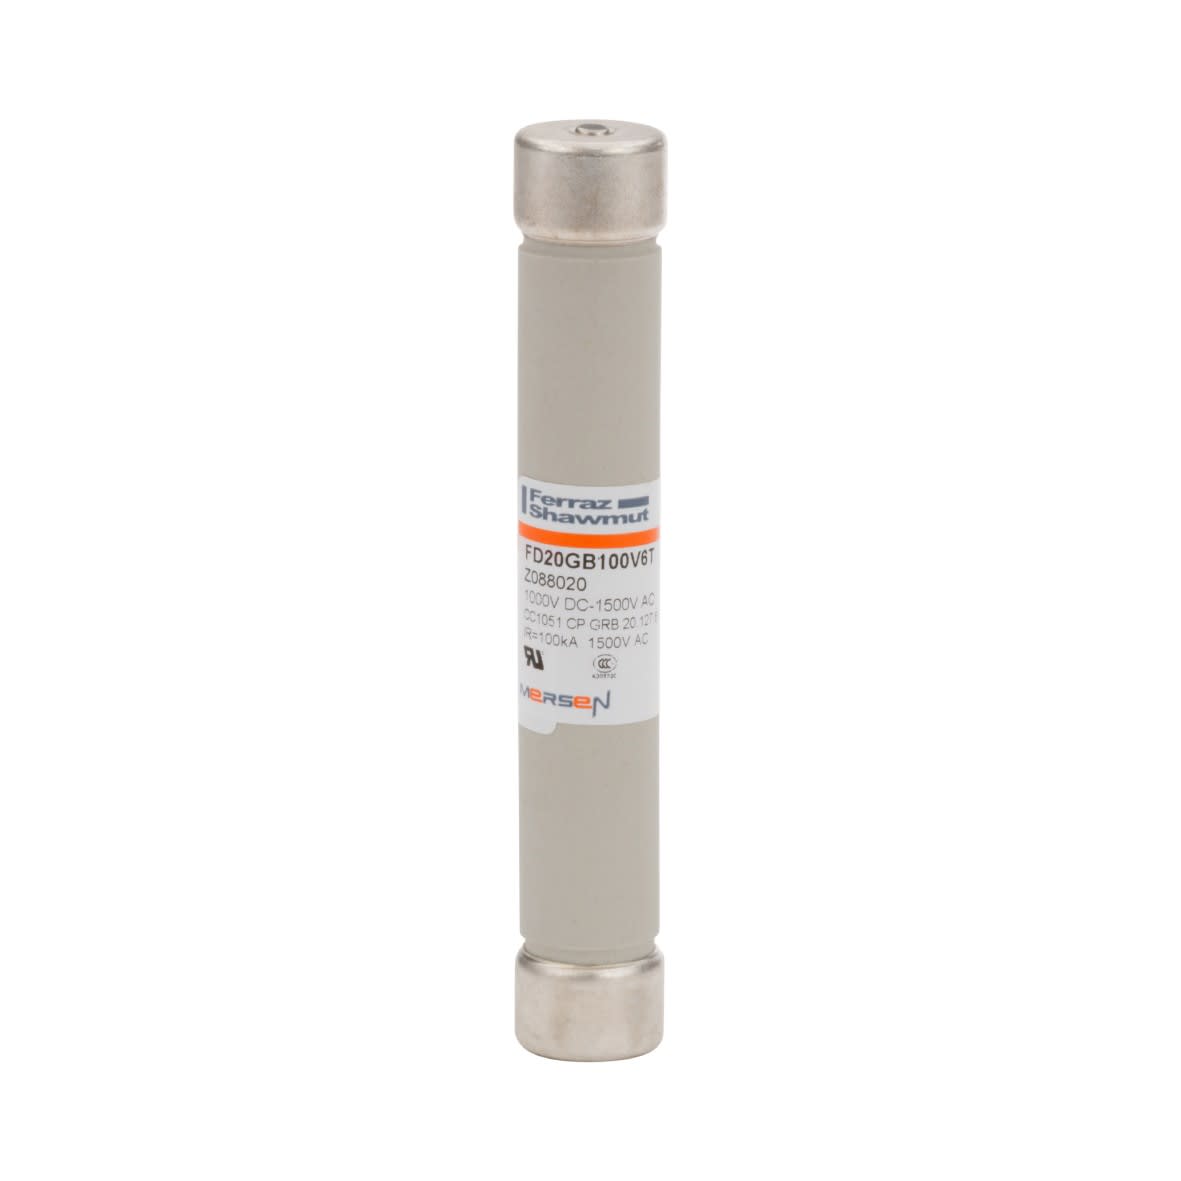 Mersen - Fusible Cylindrique ultra rapide 20x127 gR (gRD) 1500VDC 16A